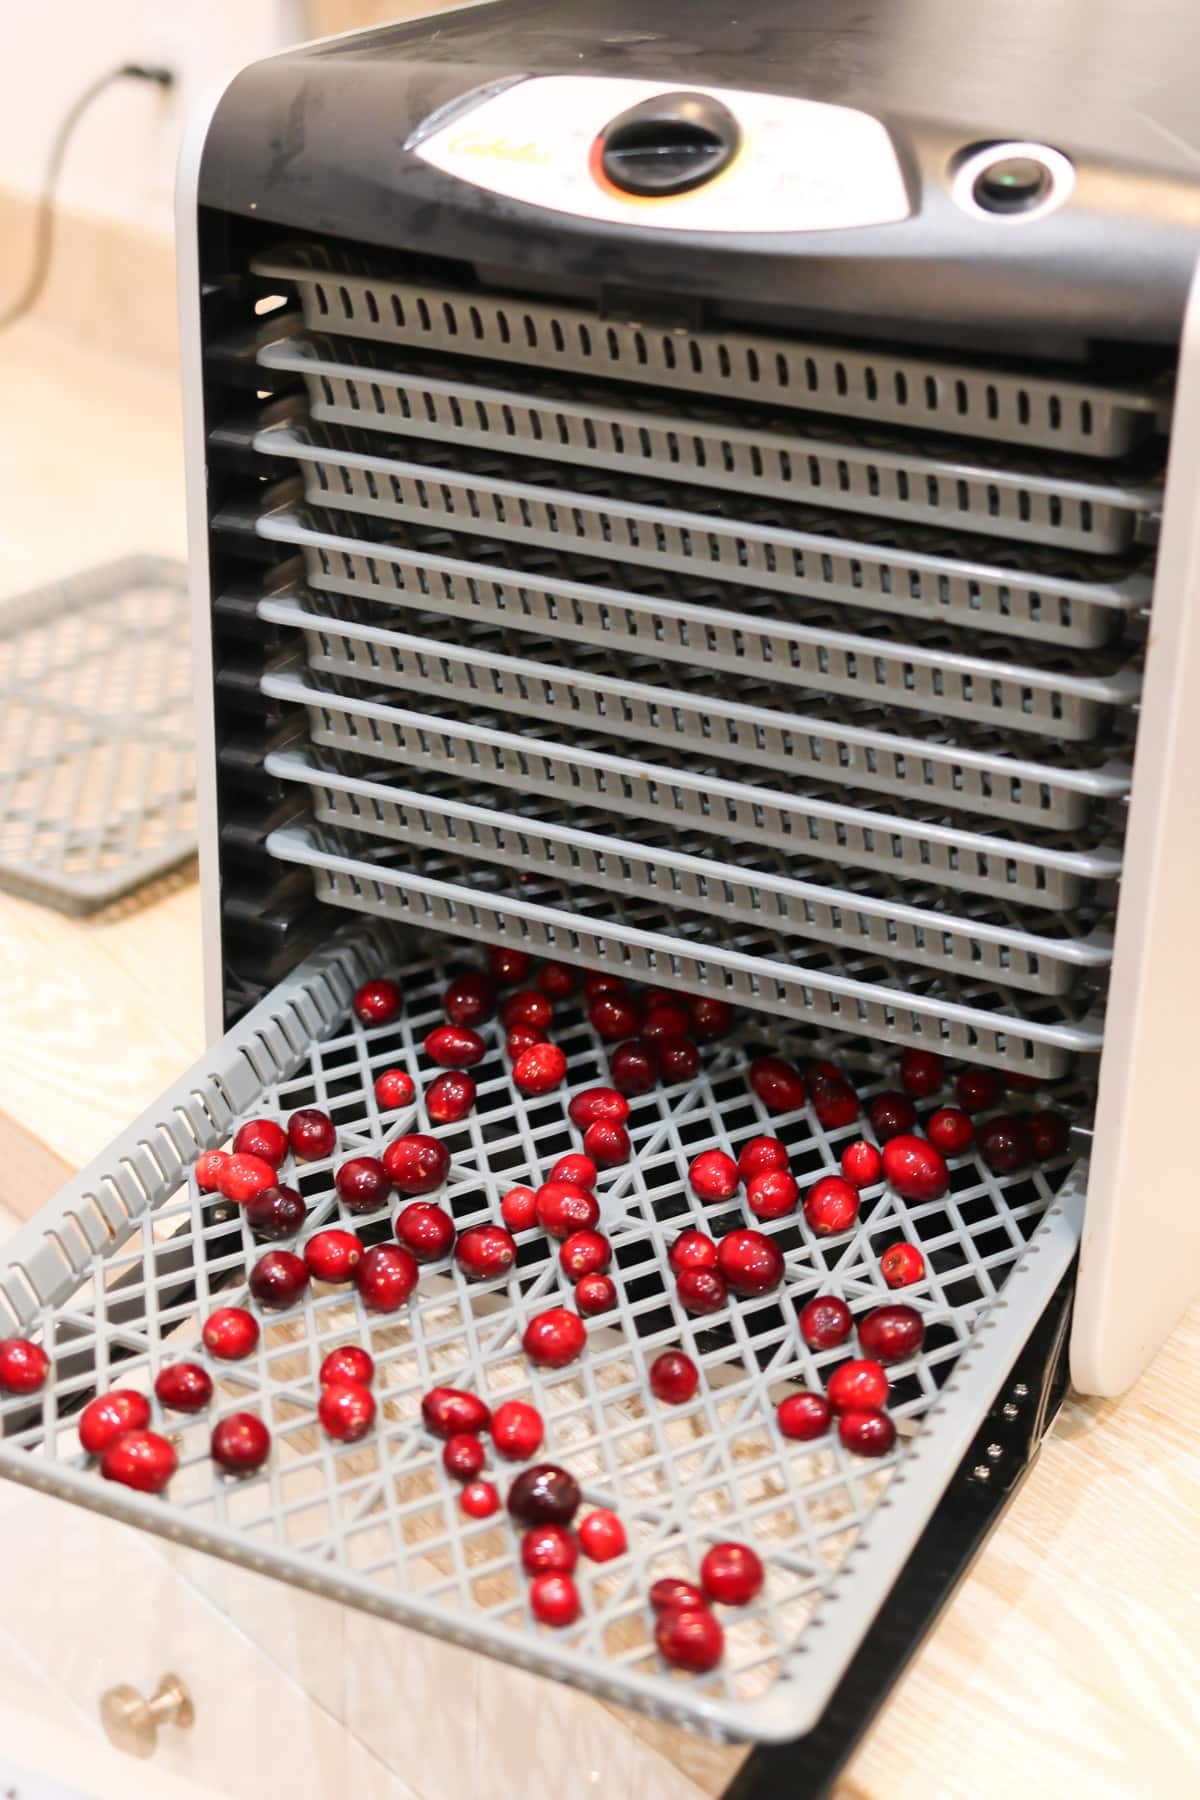 layer cranberries on food tray